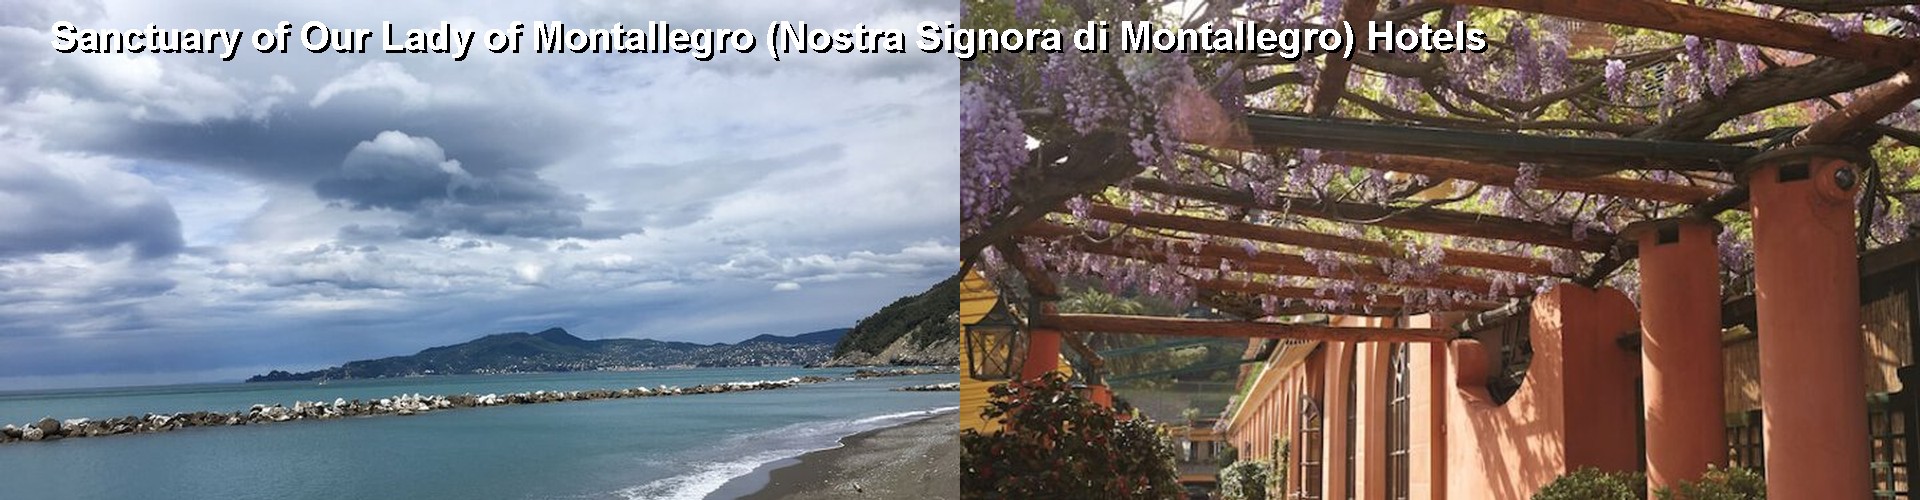 5 Best Hotels near Sanctuary of Our Lady of Montallegro (Nostra Signora di Montallegro)